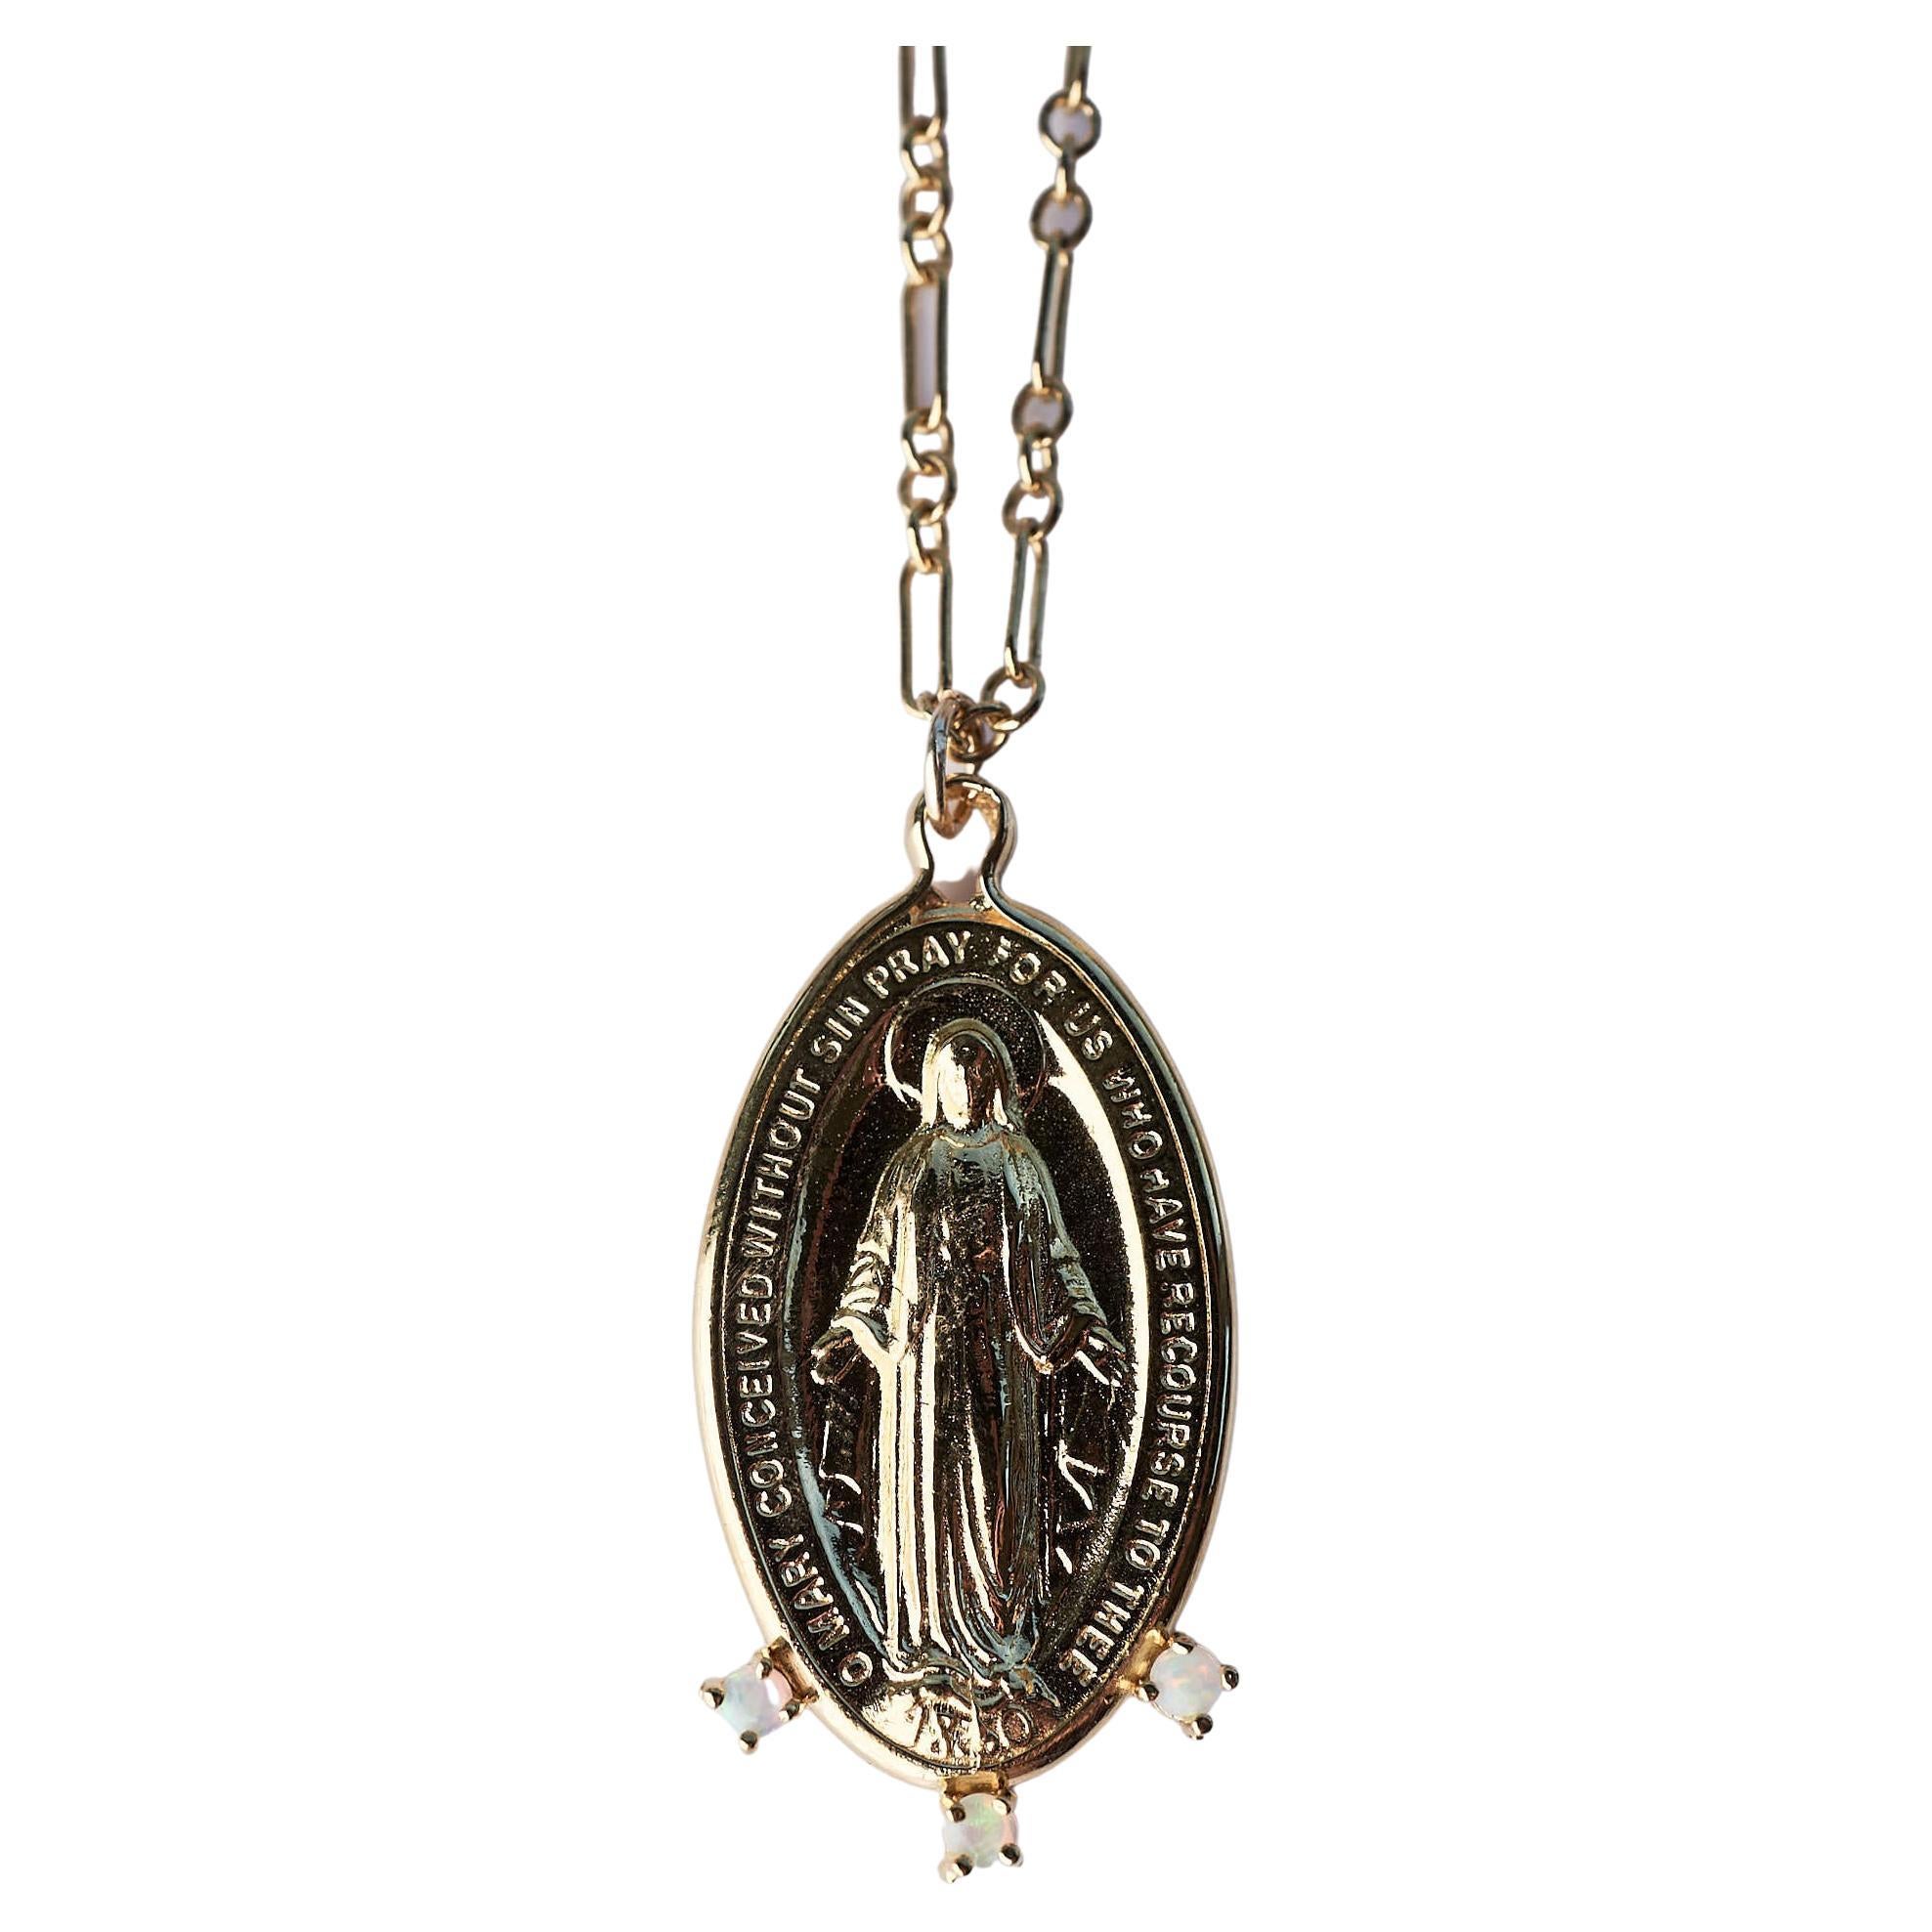 Oval Medal Chain Opal Necklace Virgin Mary Gold Plated J Dauphin